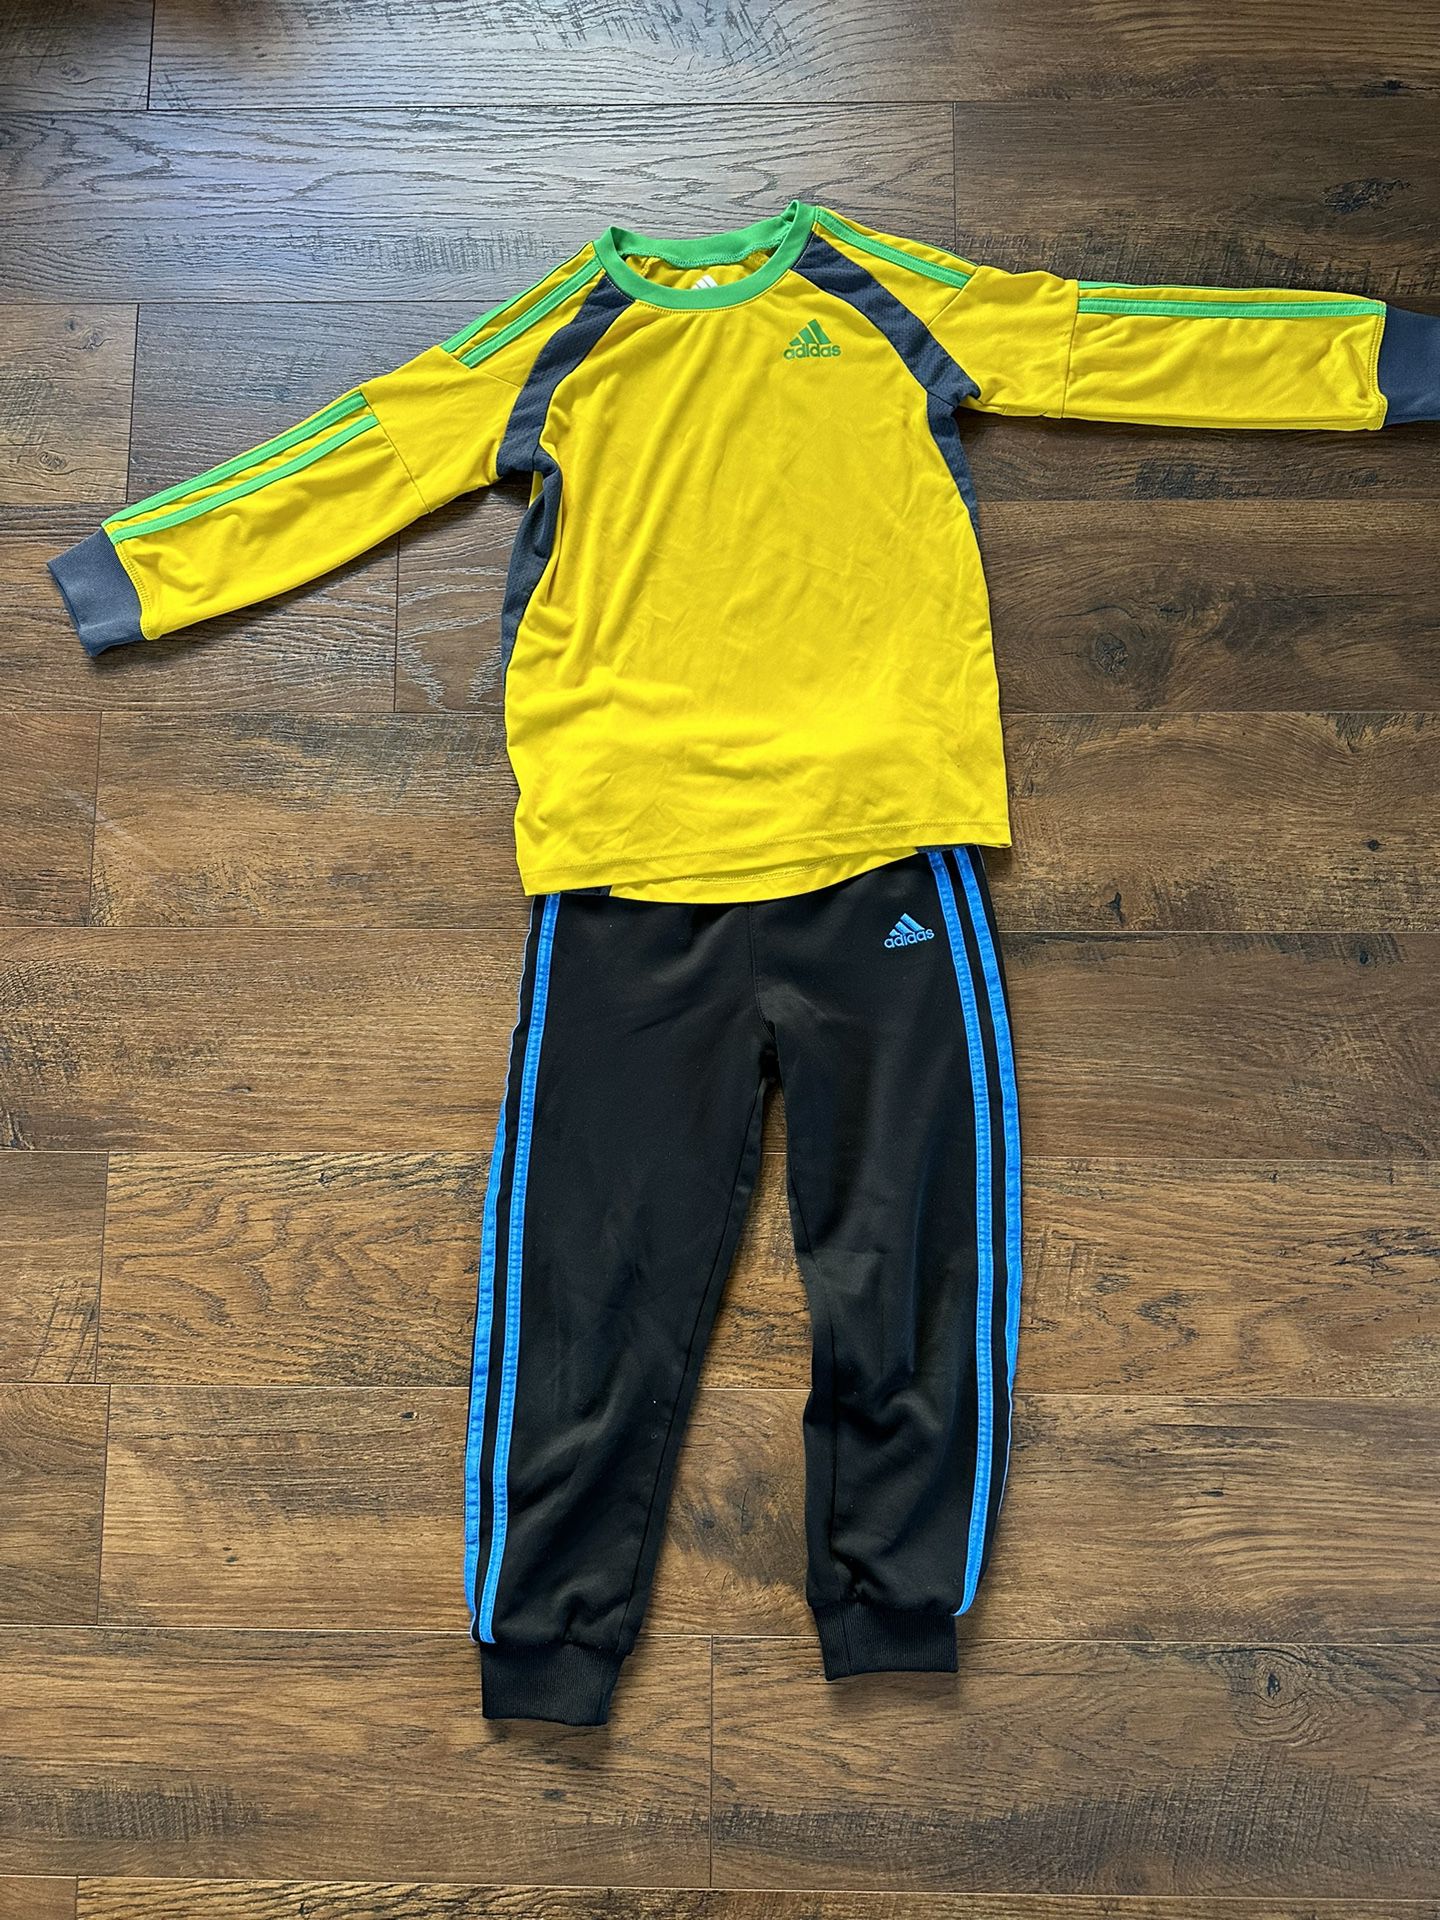 Boys Adidas Pants And Top Size Small (6/7)